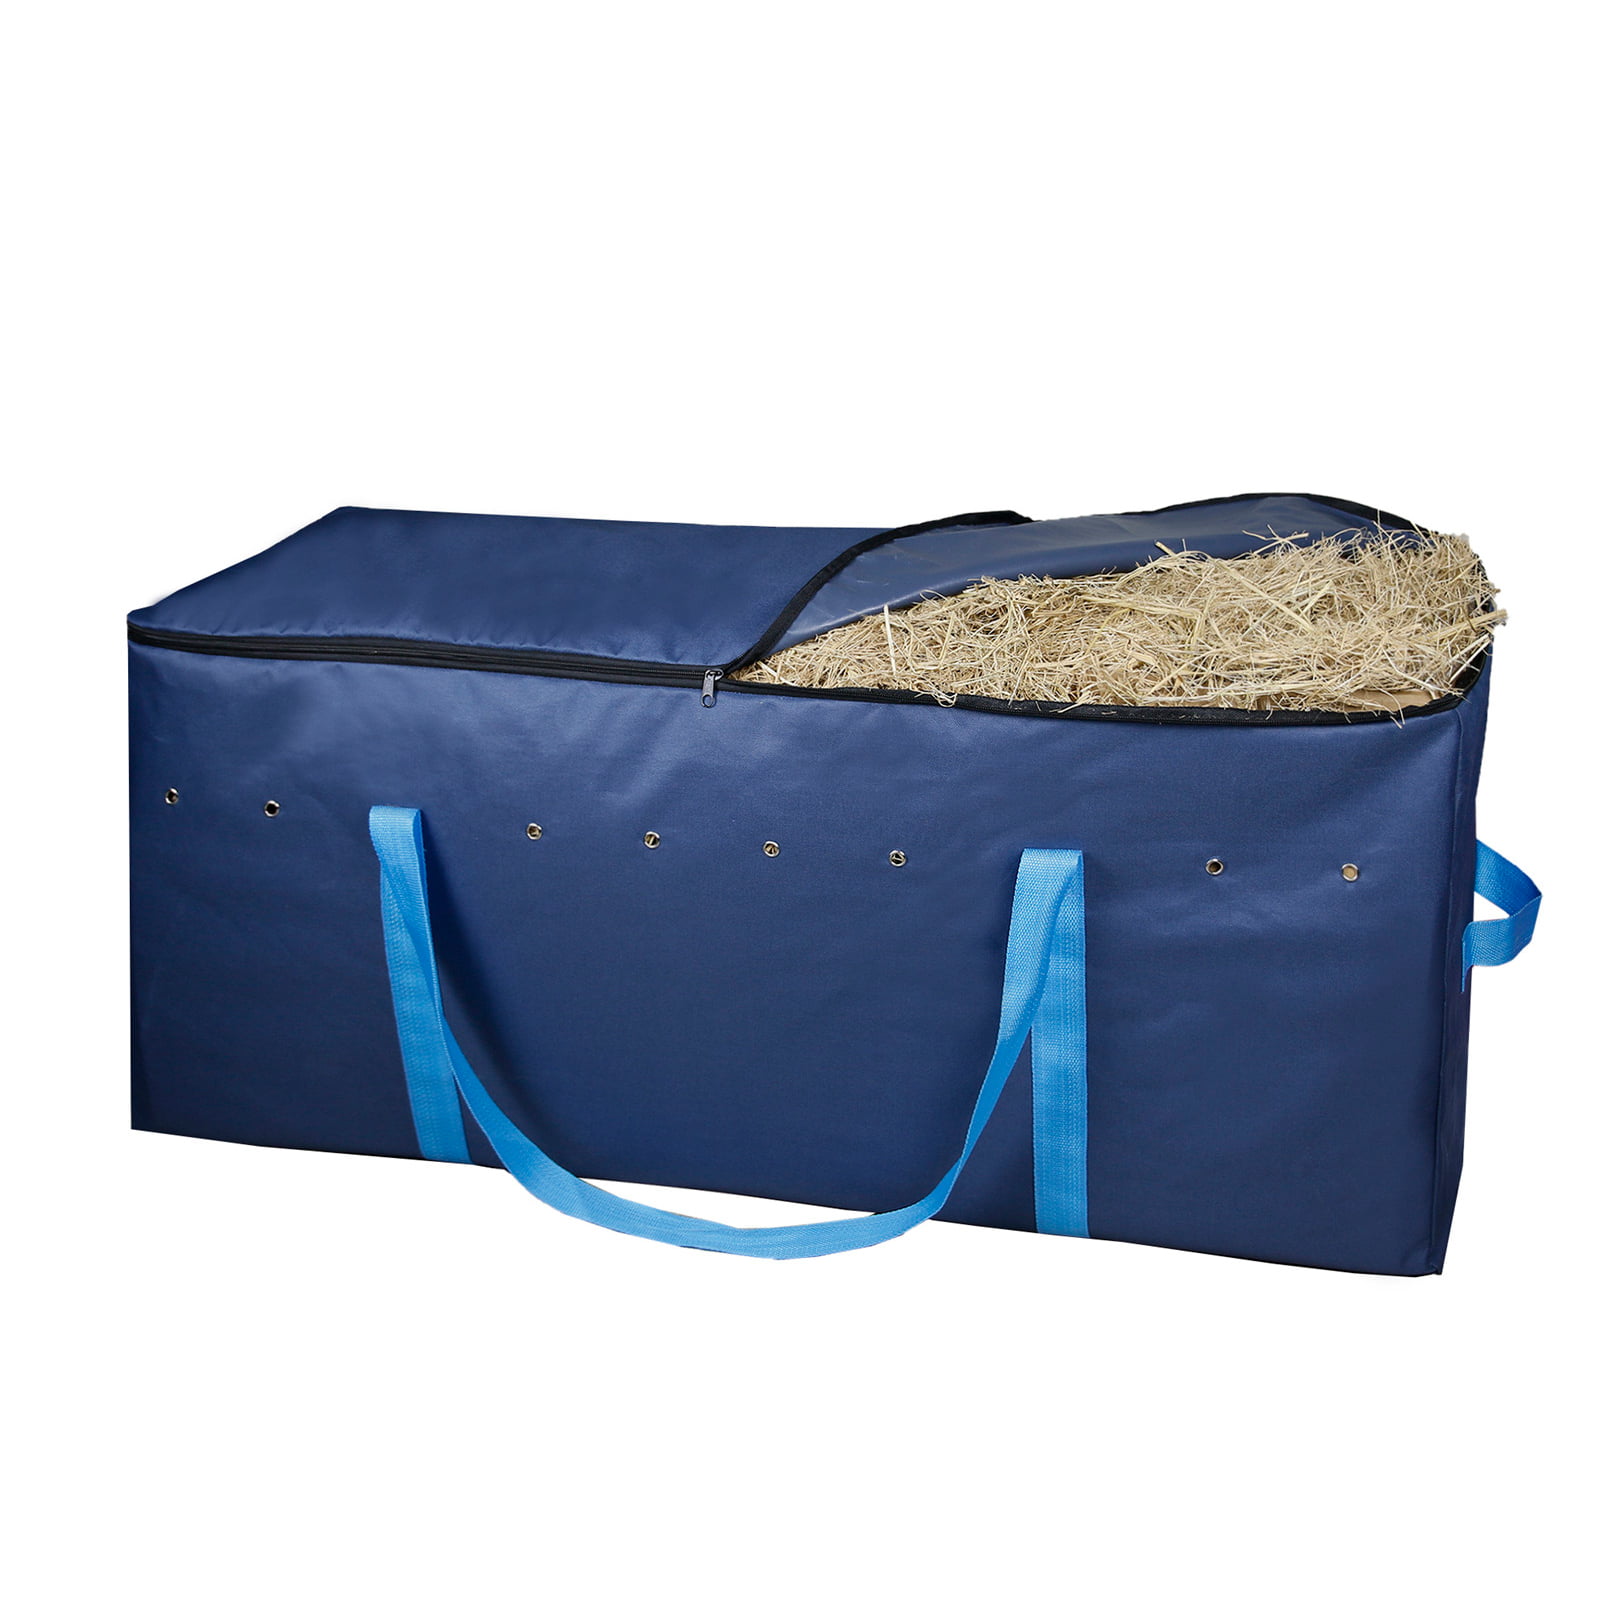 Foldable Portable Horse and Livestock Hay Bale Bags with Zipper Waterproof RETYLY Hay Bale Storage Bag Extra Large Tote Hay Bale Carry Bag